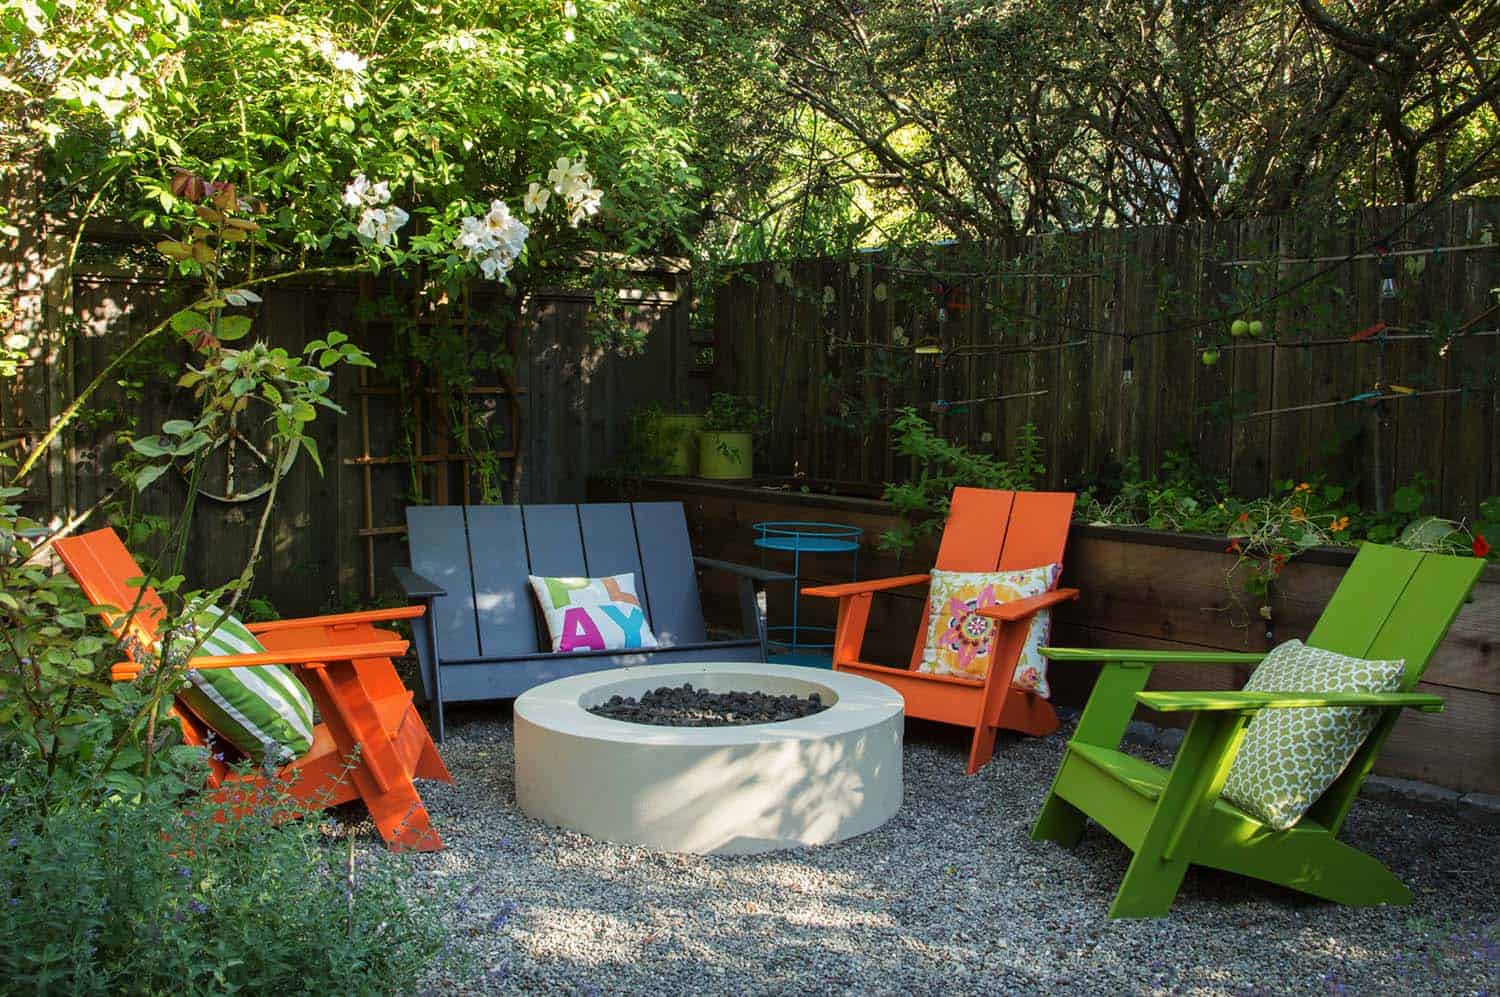 28 Inspiring Fire Pit Ideas To Create A, Can You Have A Small Fire Pit In Your Backyard